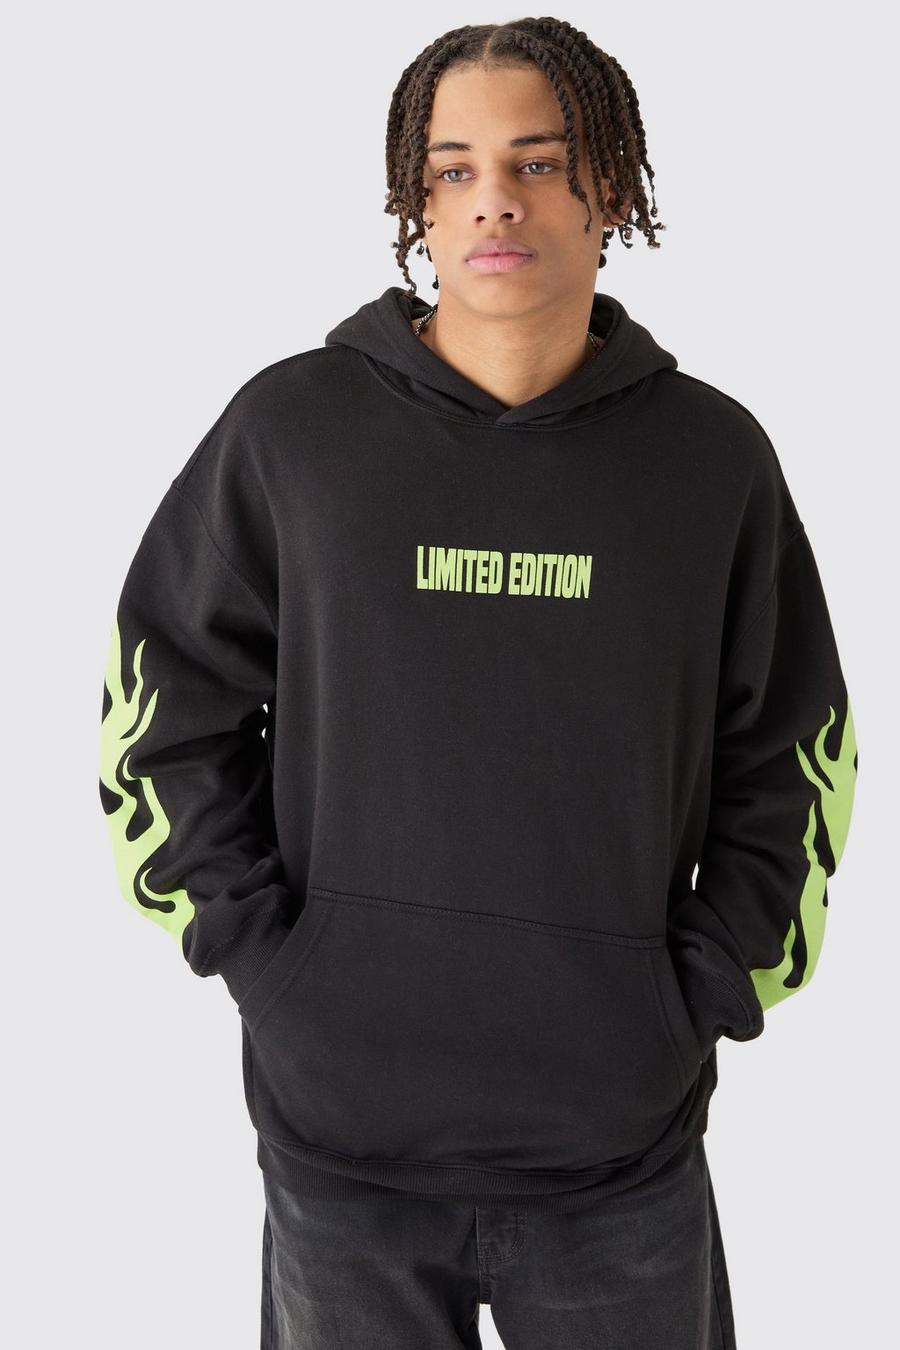 Black Oversized Limited Edition Flame Hoodie